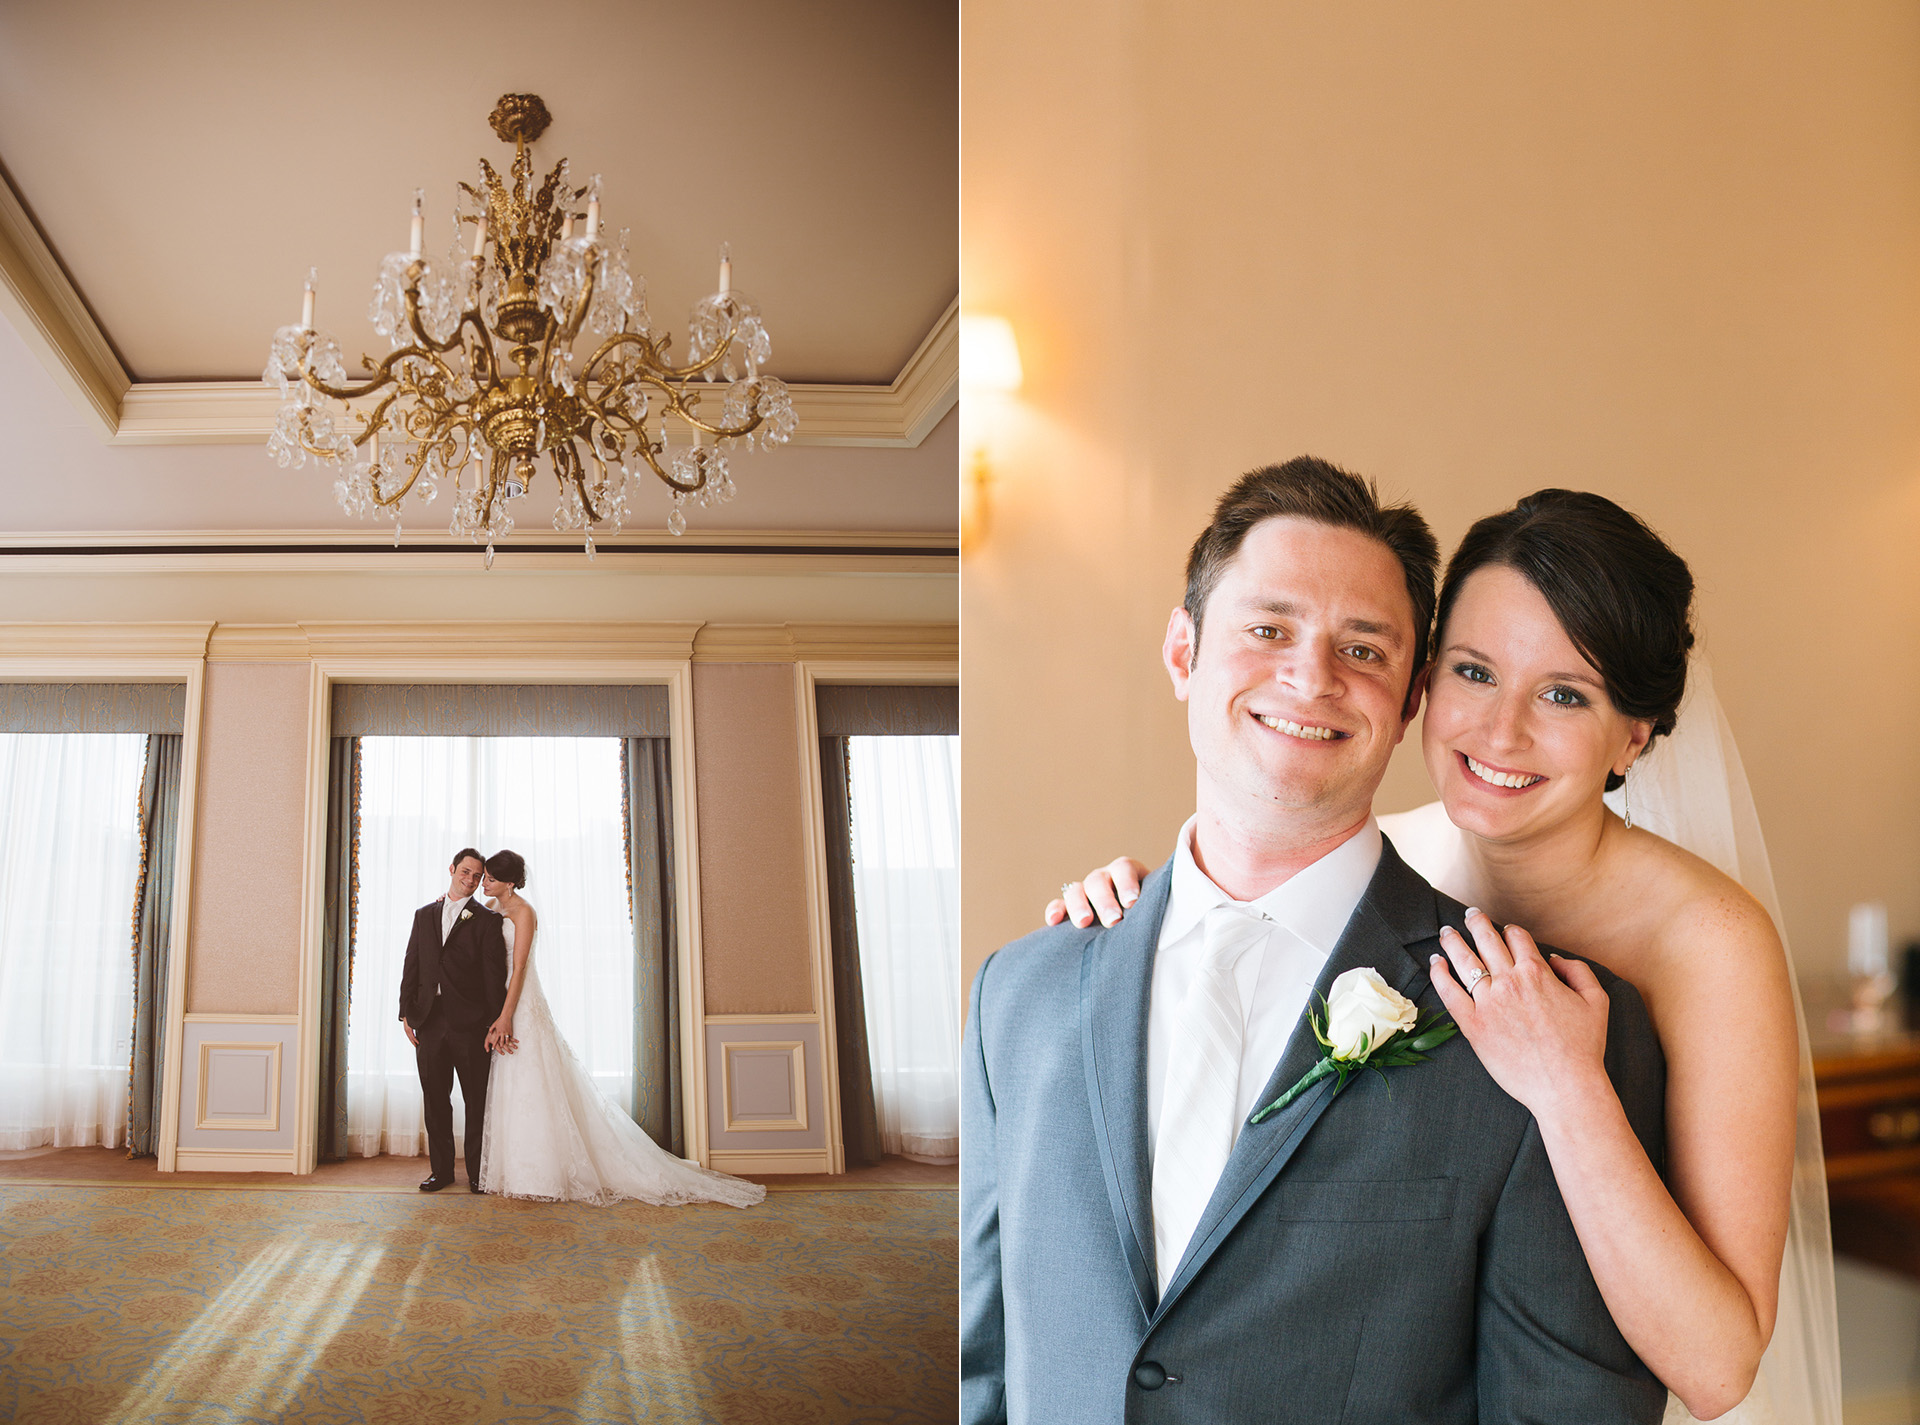 Cleveland Wedding at the Ritz Carlton Hotel - Too Much Awesomeness Photographer 24.jpg